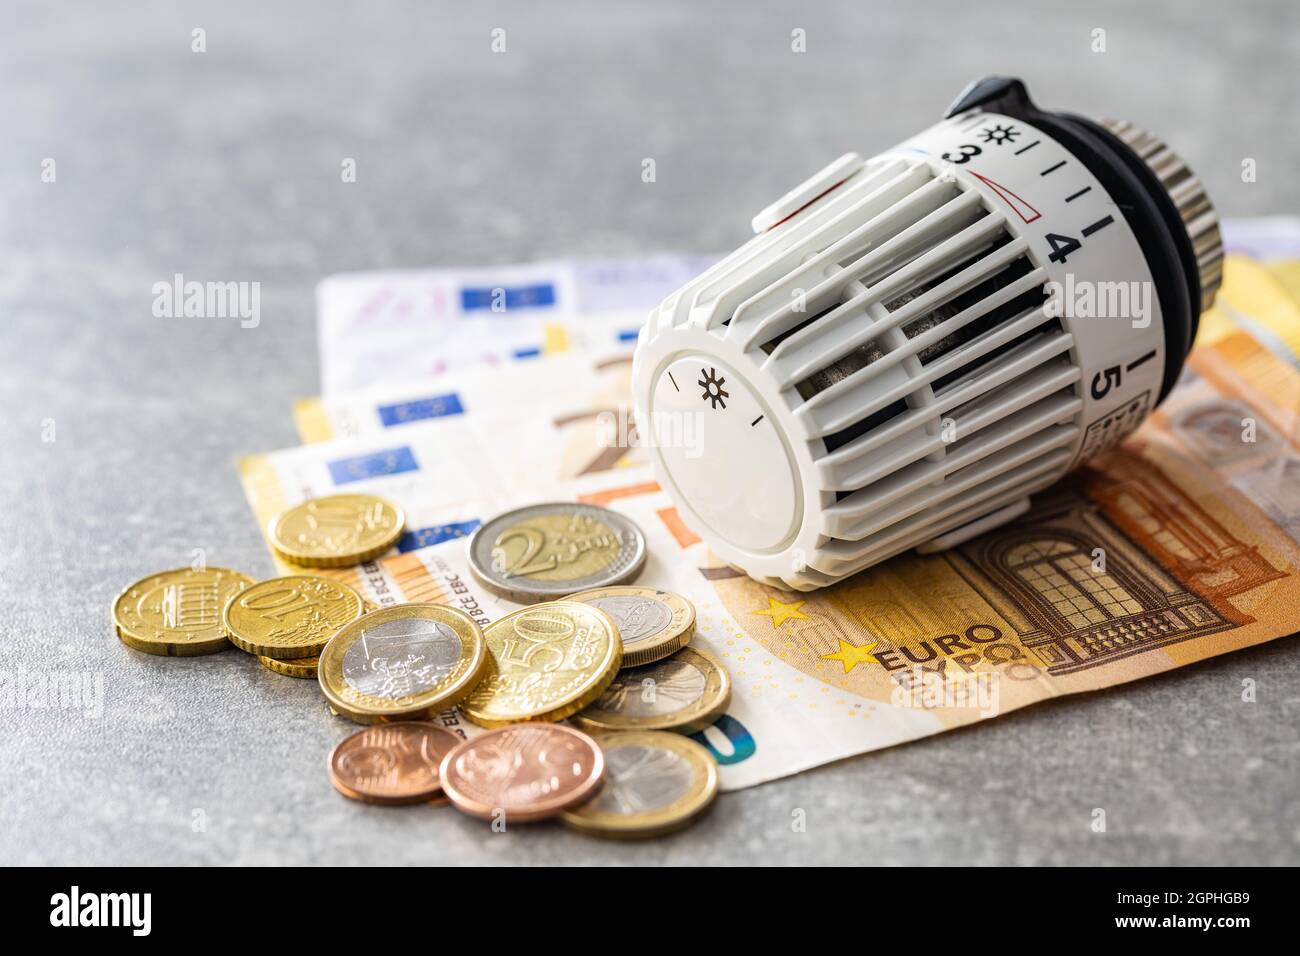 Thermostatic head and Euro money. Banknotes and coins. Stock Photo